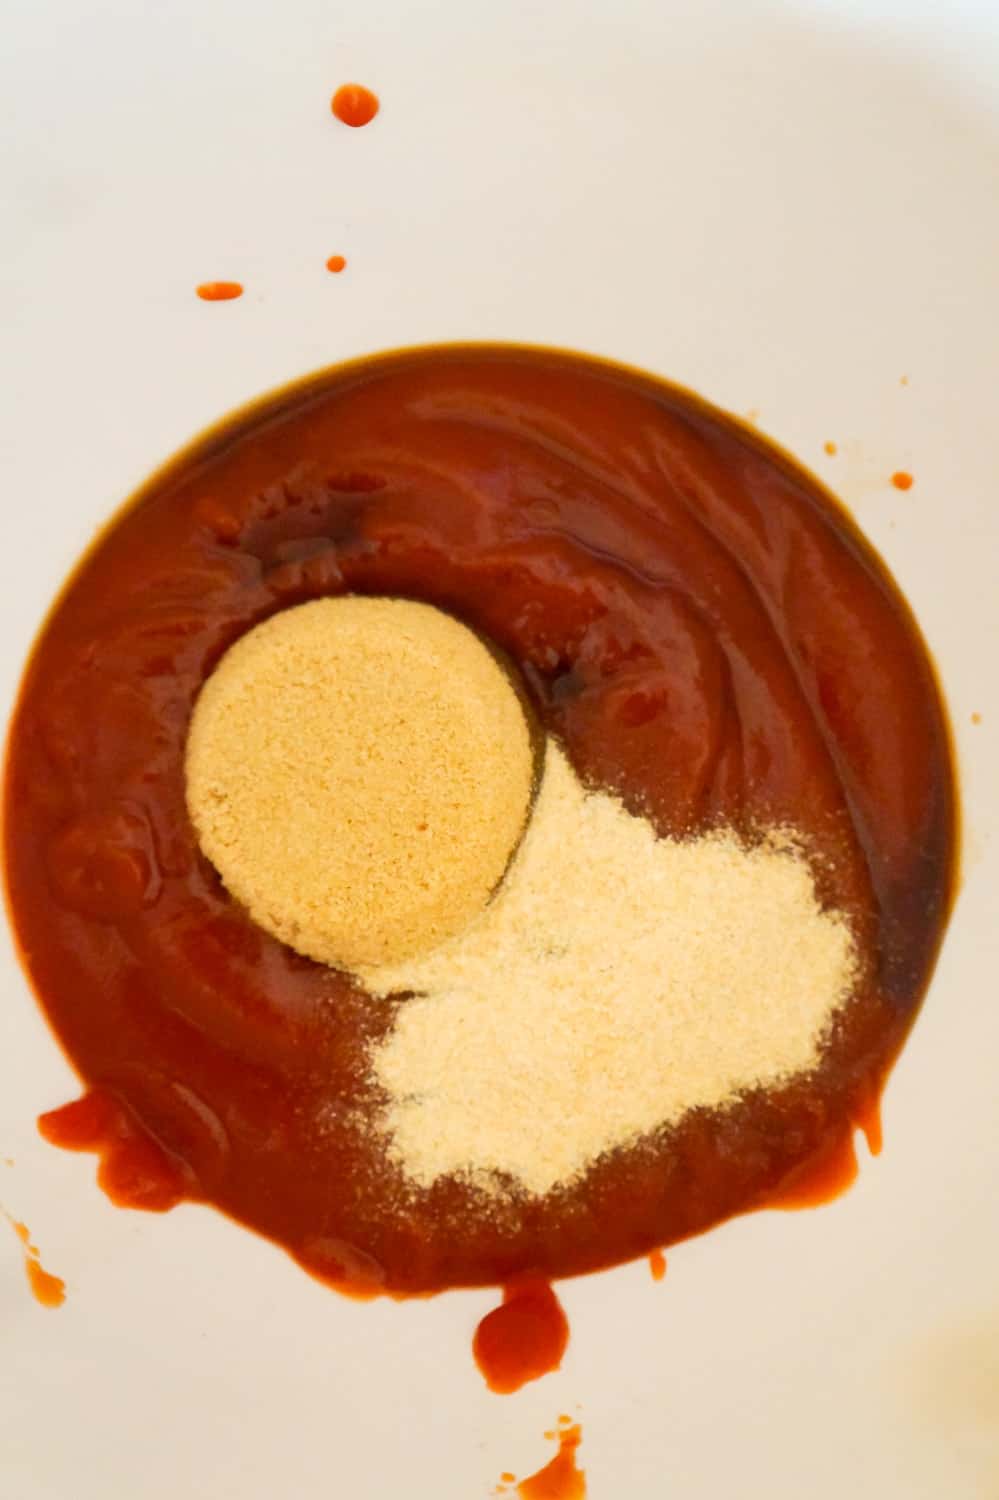 ketchup, worcestershire sauce, brown sugar and onion powder in a mixing bowl